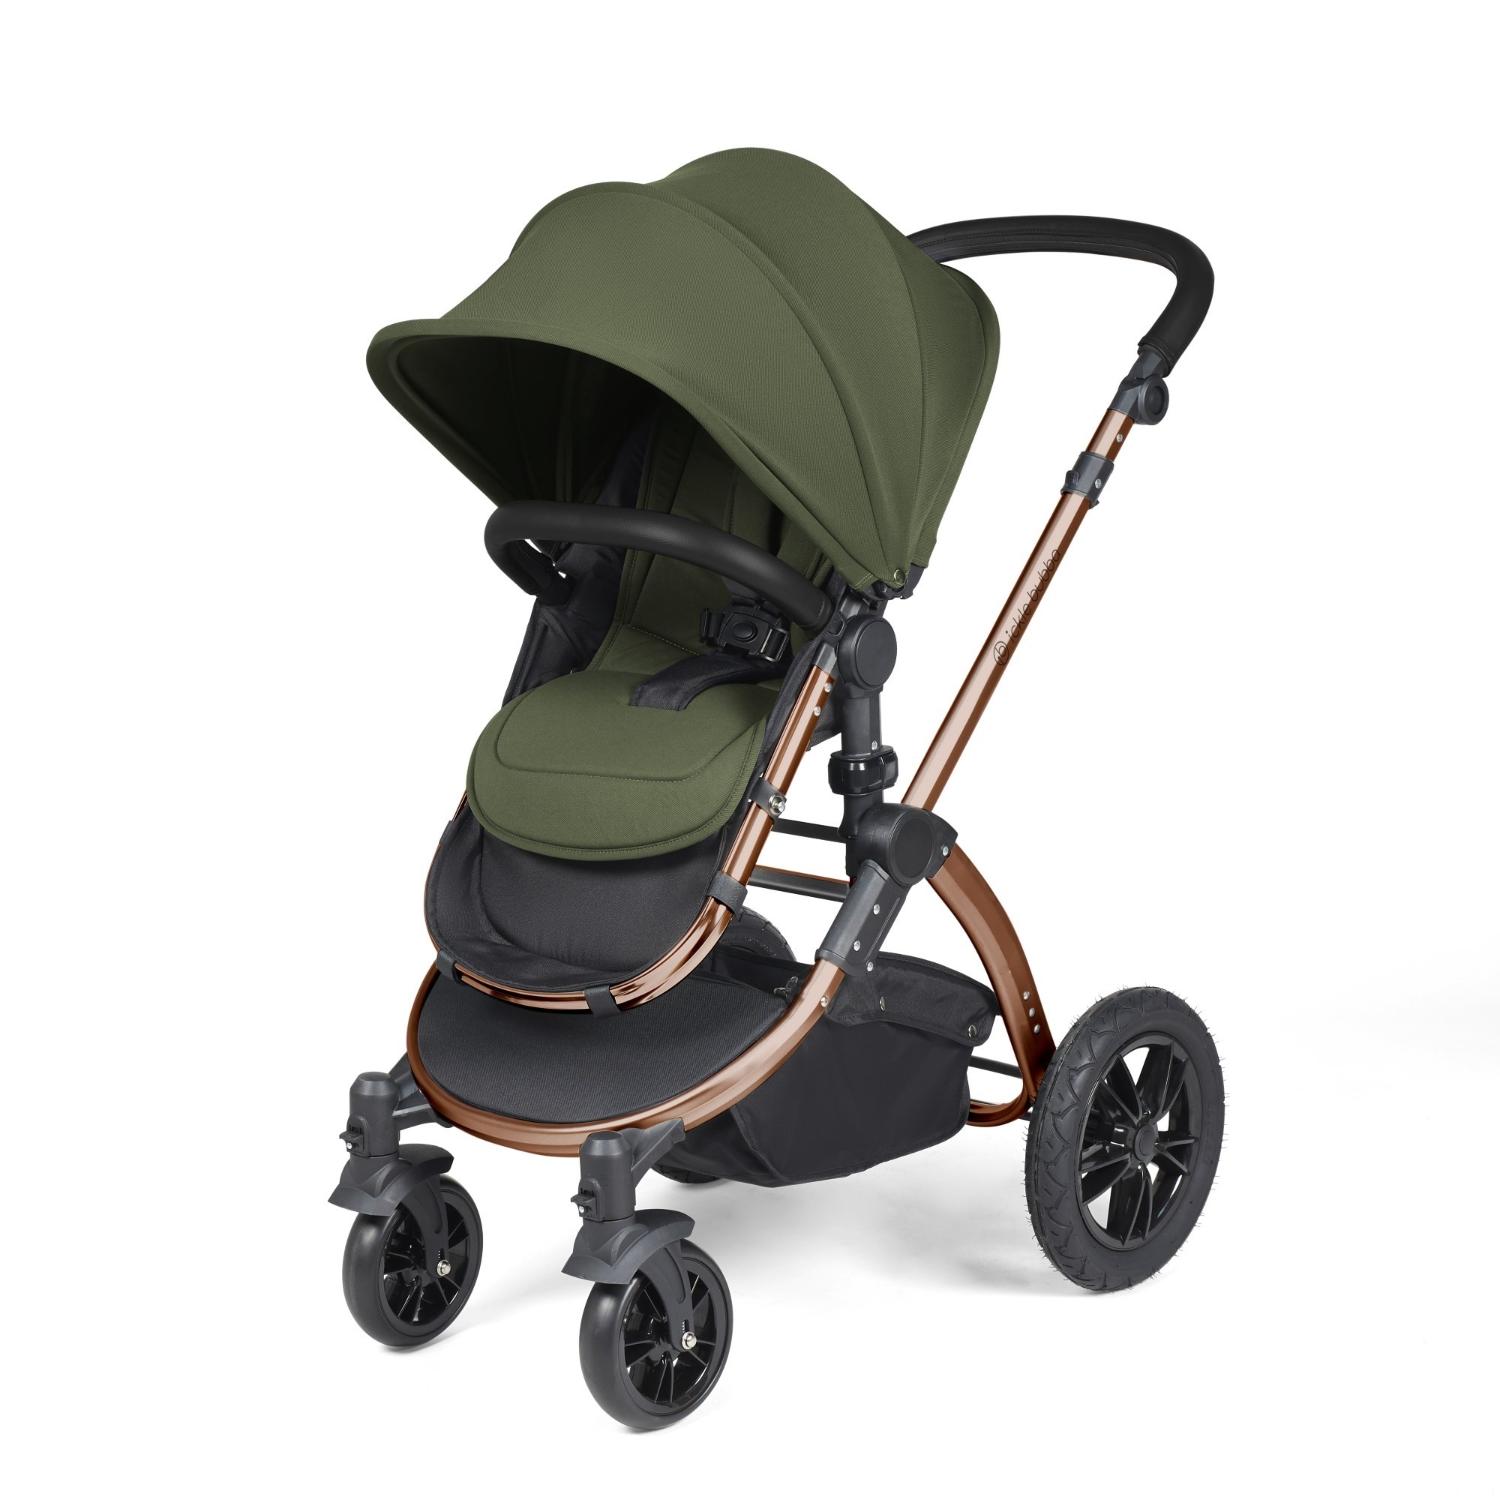 Ickle Bubba Stomp Luxe Pushchair with seat unit attached in Woodland green colour with bronze chassis